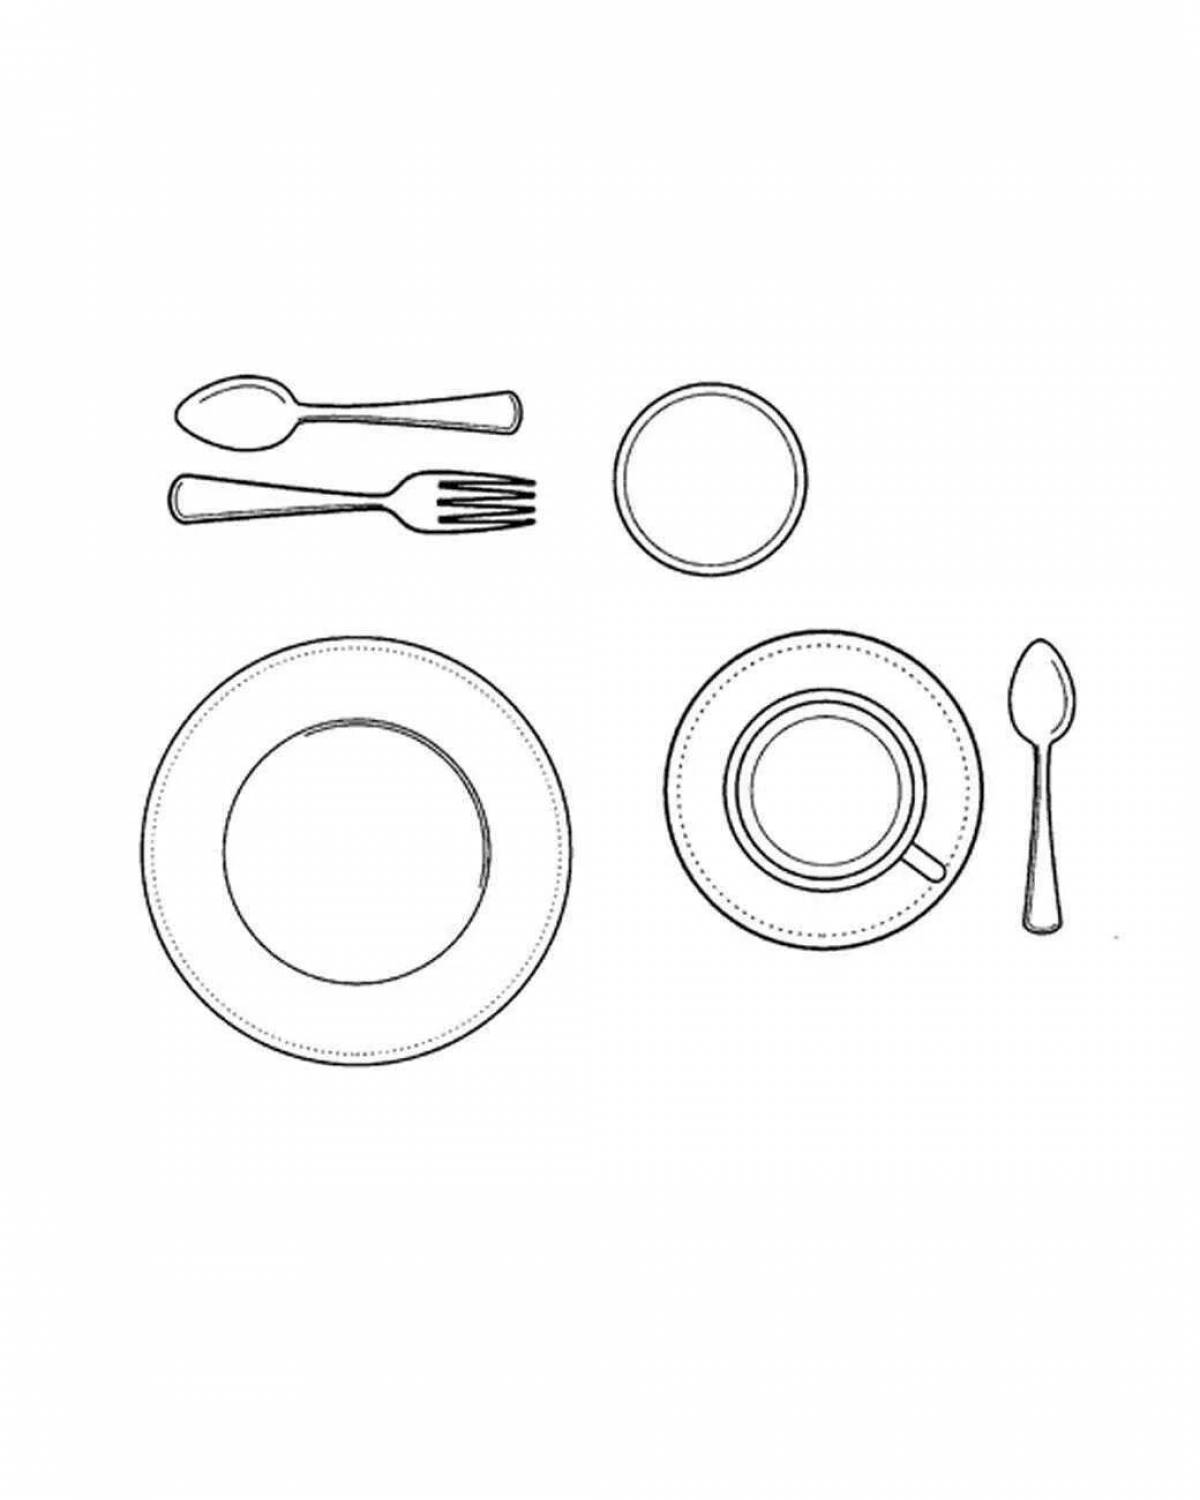 Delightful table setting coloring book for kids